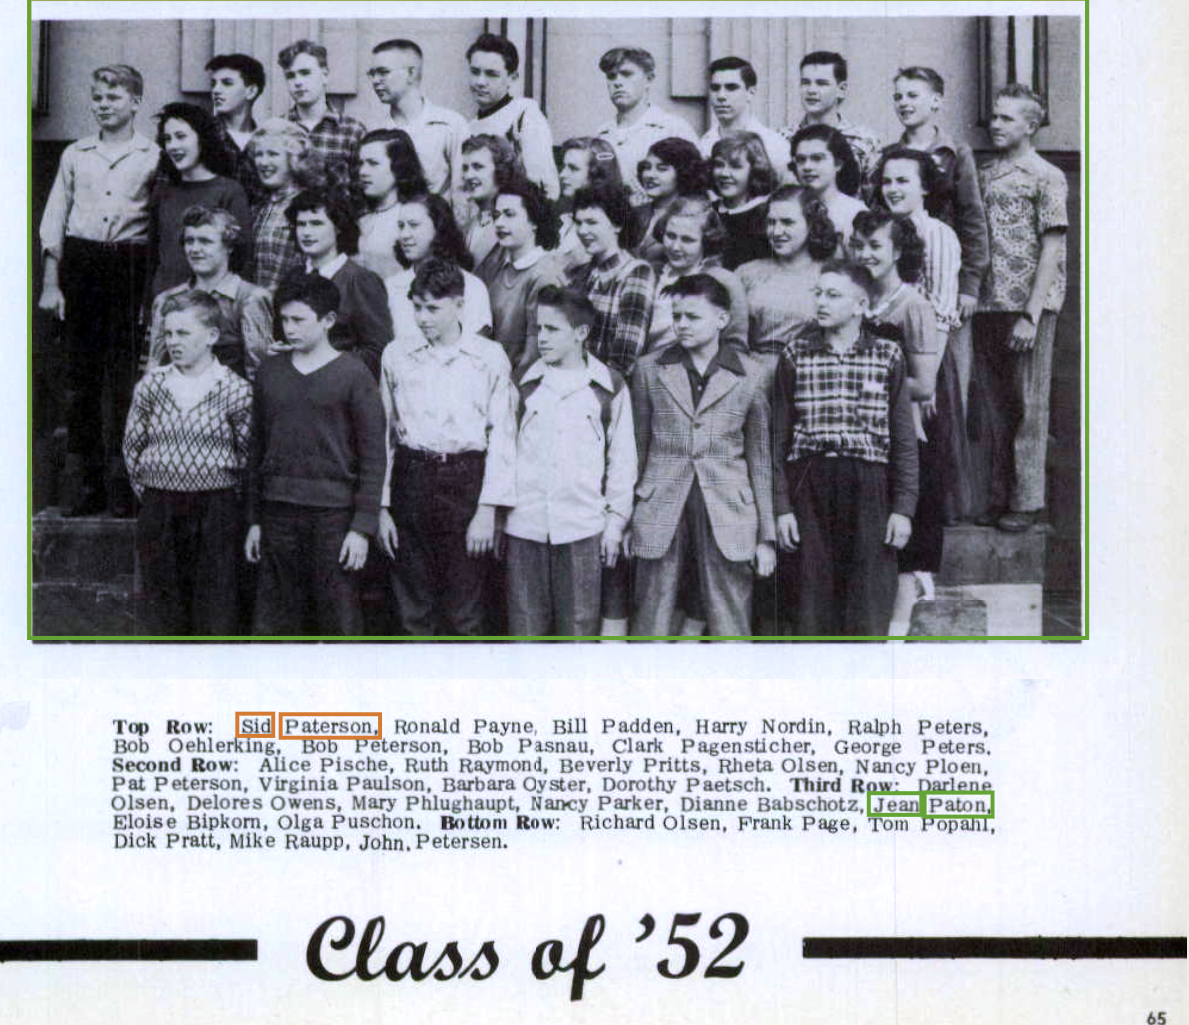 Members of the class of 1952 standing in four rows